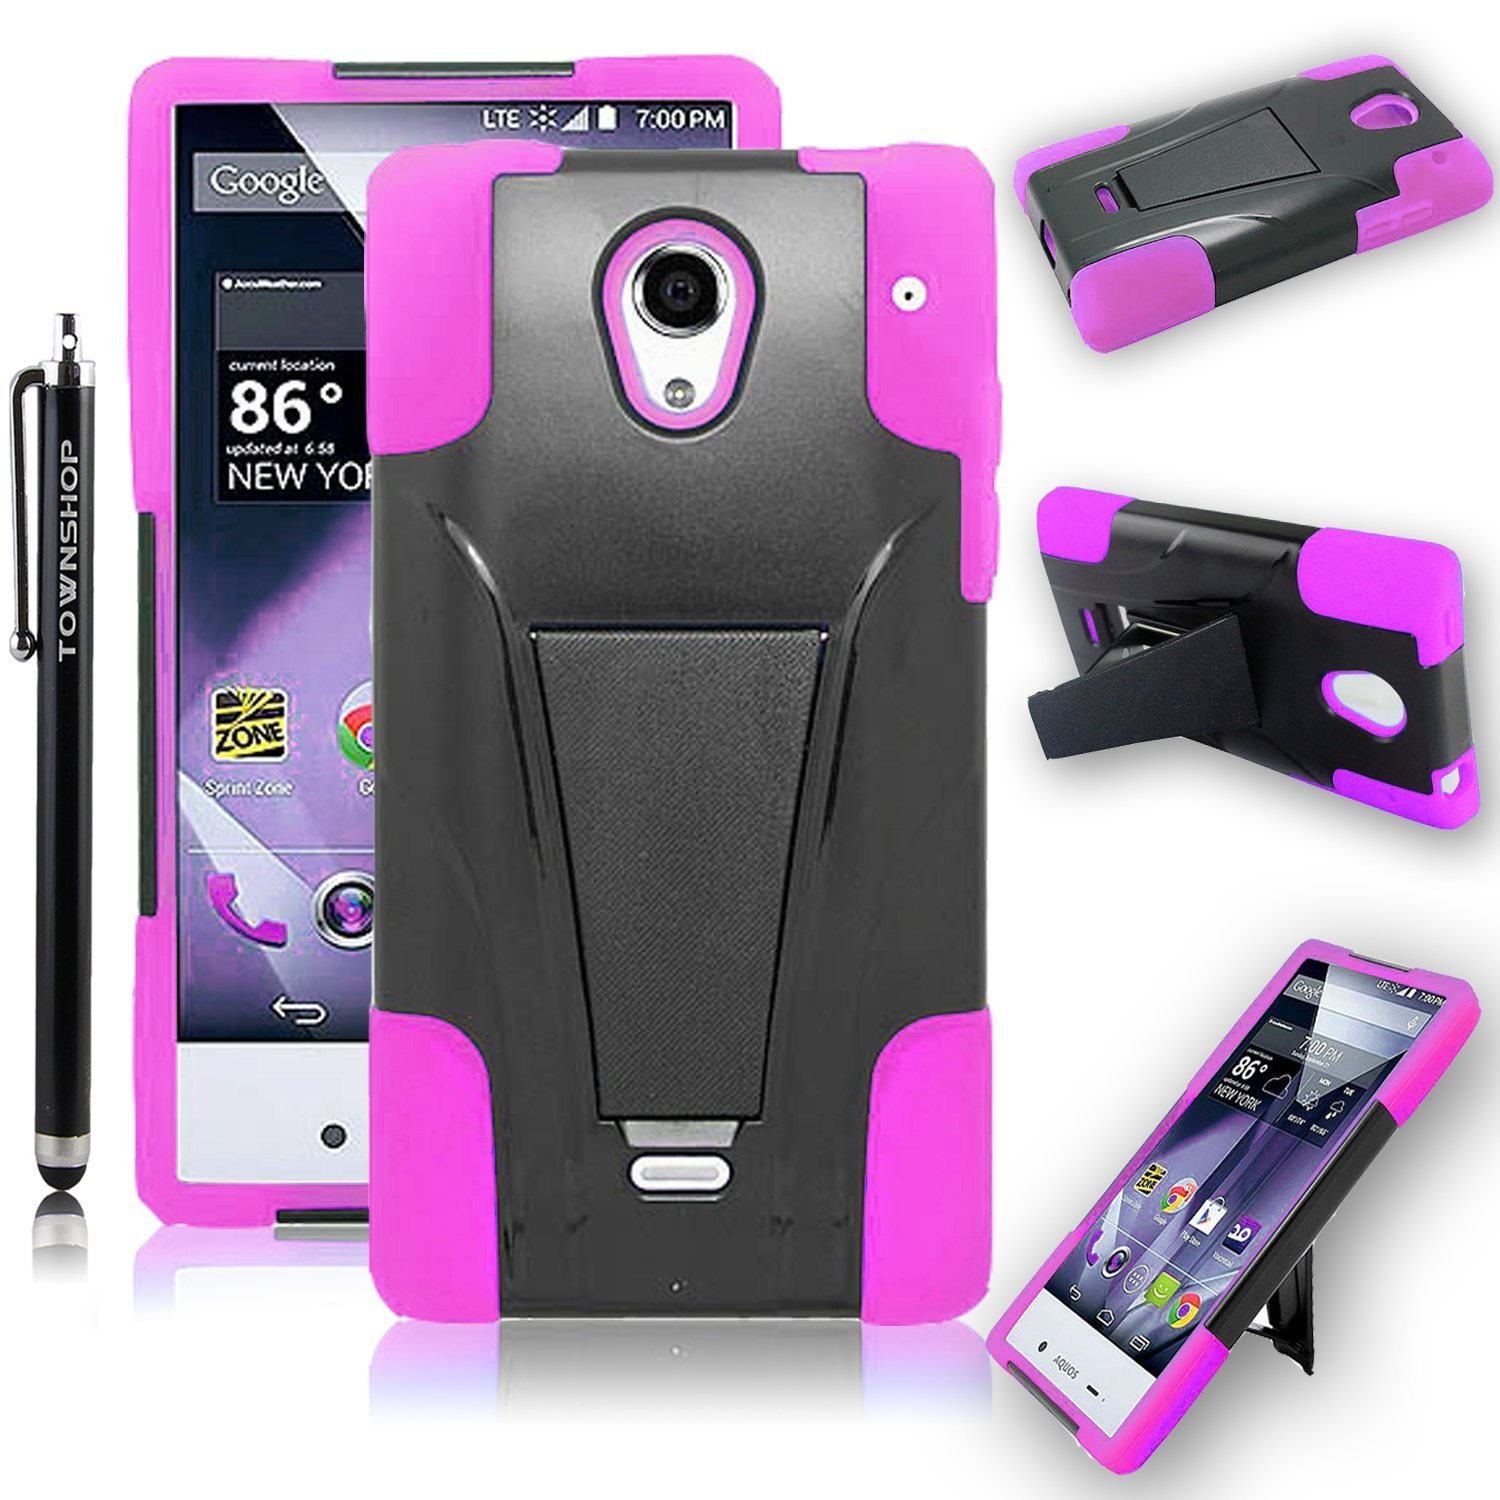 Townshop Extreme Rugged Hybrid Case For Sharp Aquos Crystal 306sh Android Authority